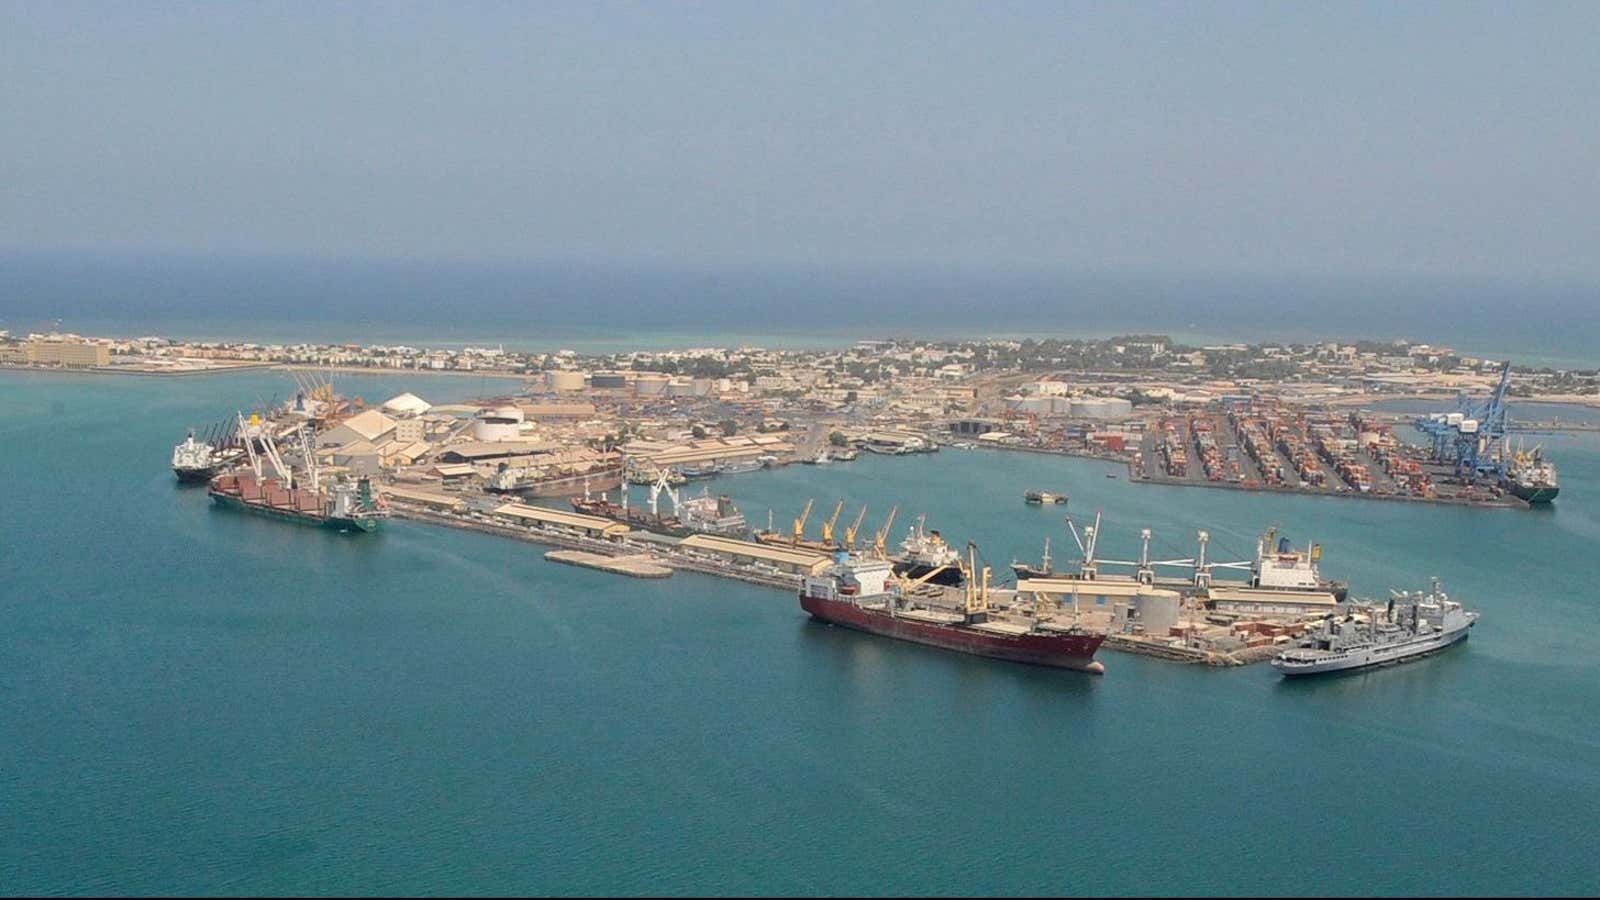 An aerial view of Djibouti sea port.